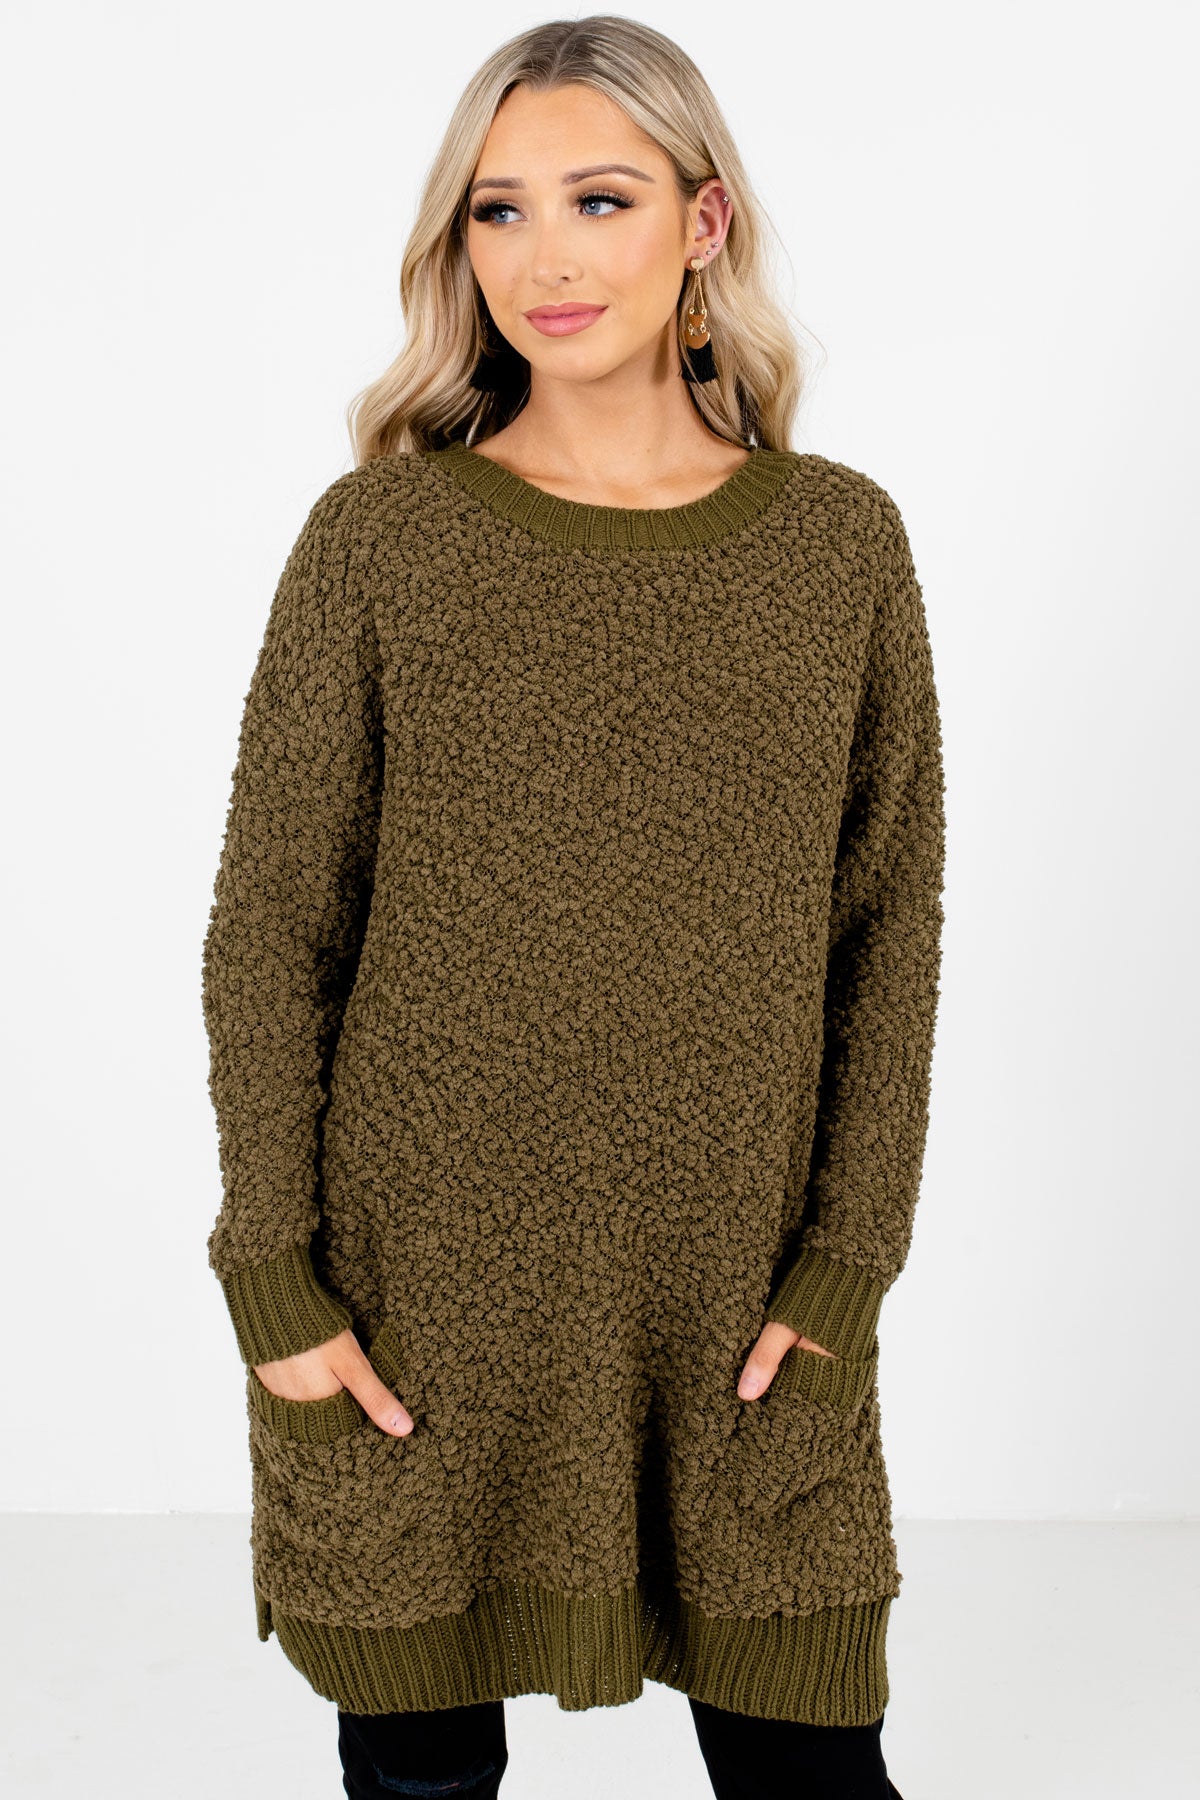 Women's Olive Green Cozy and Warm Boutique Sweater